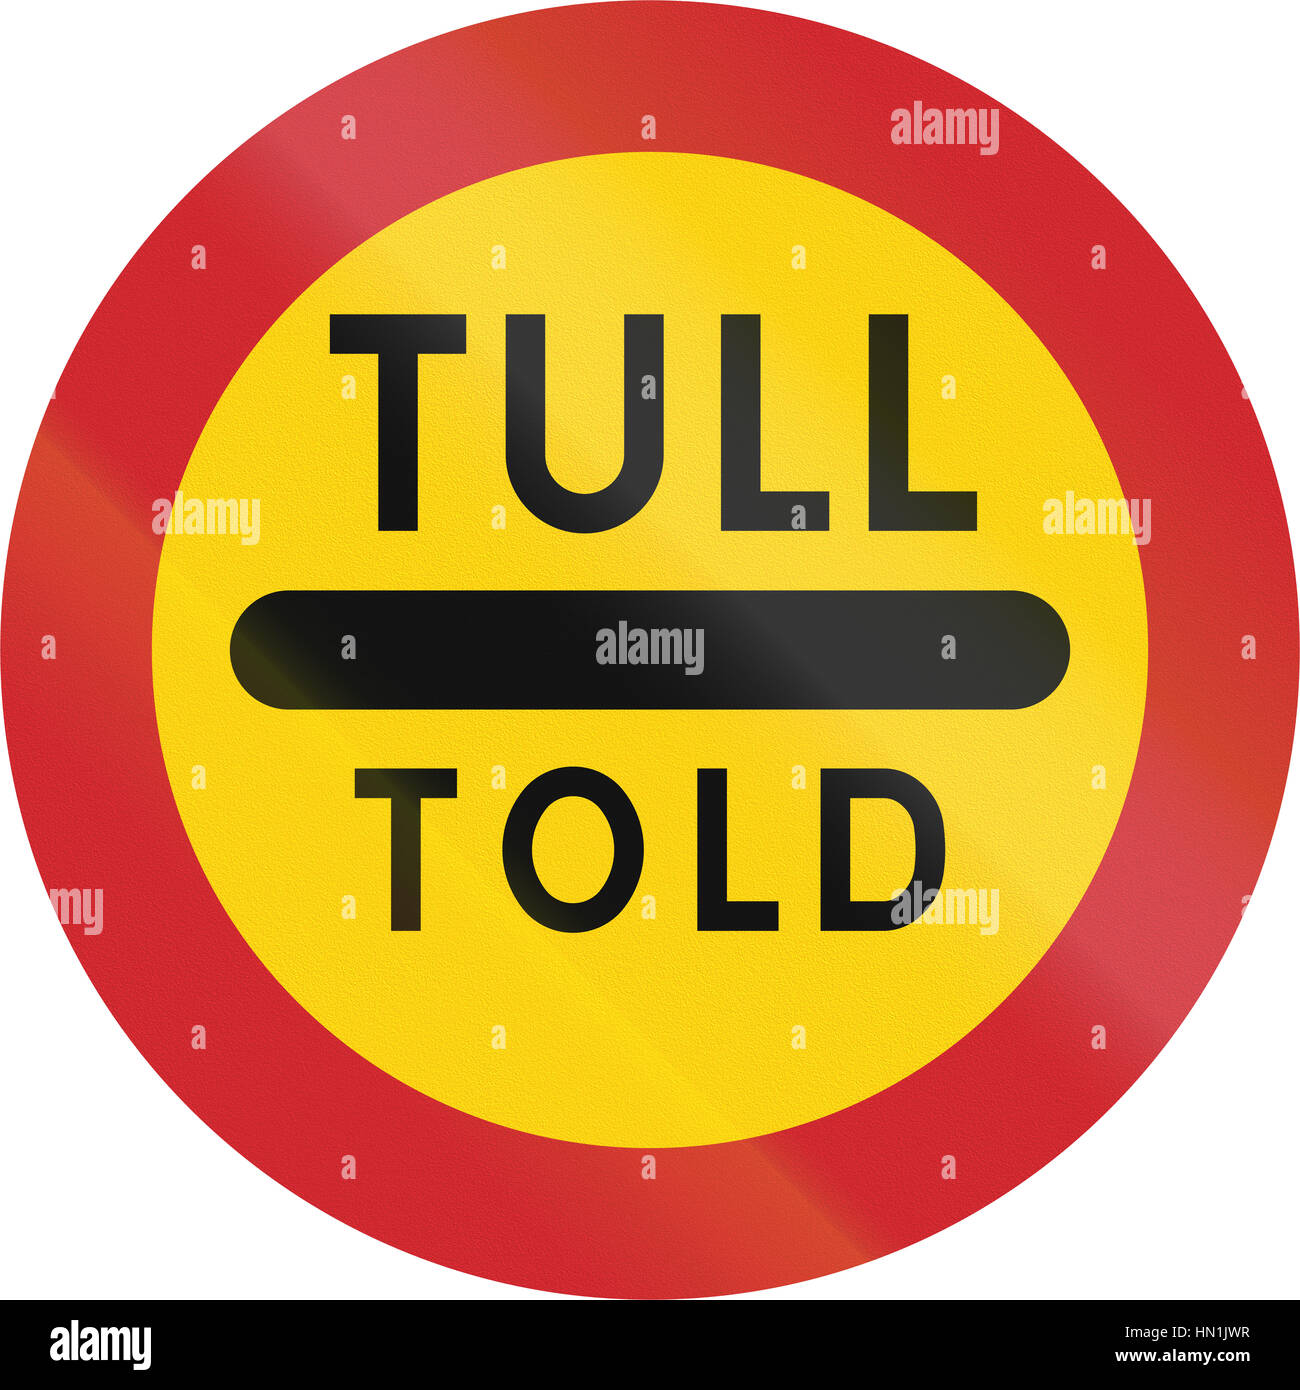 Road sign used in Sweden - Toll in Swedish and Danish. Stock Photo